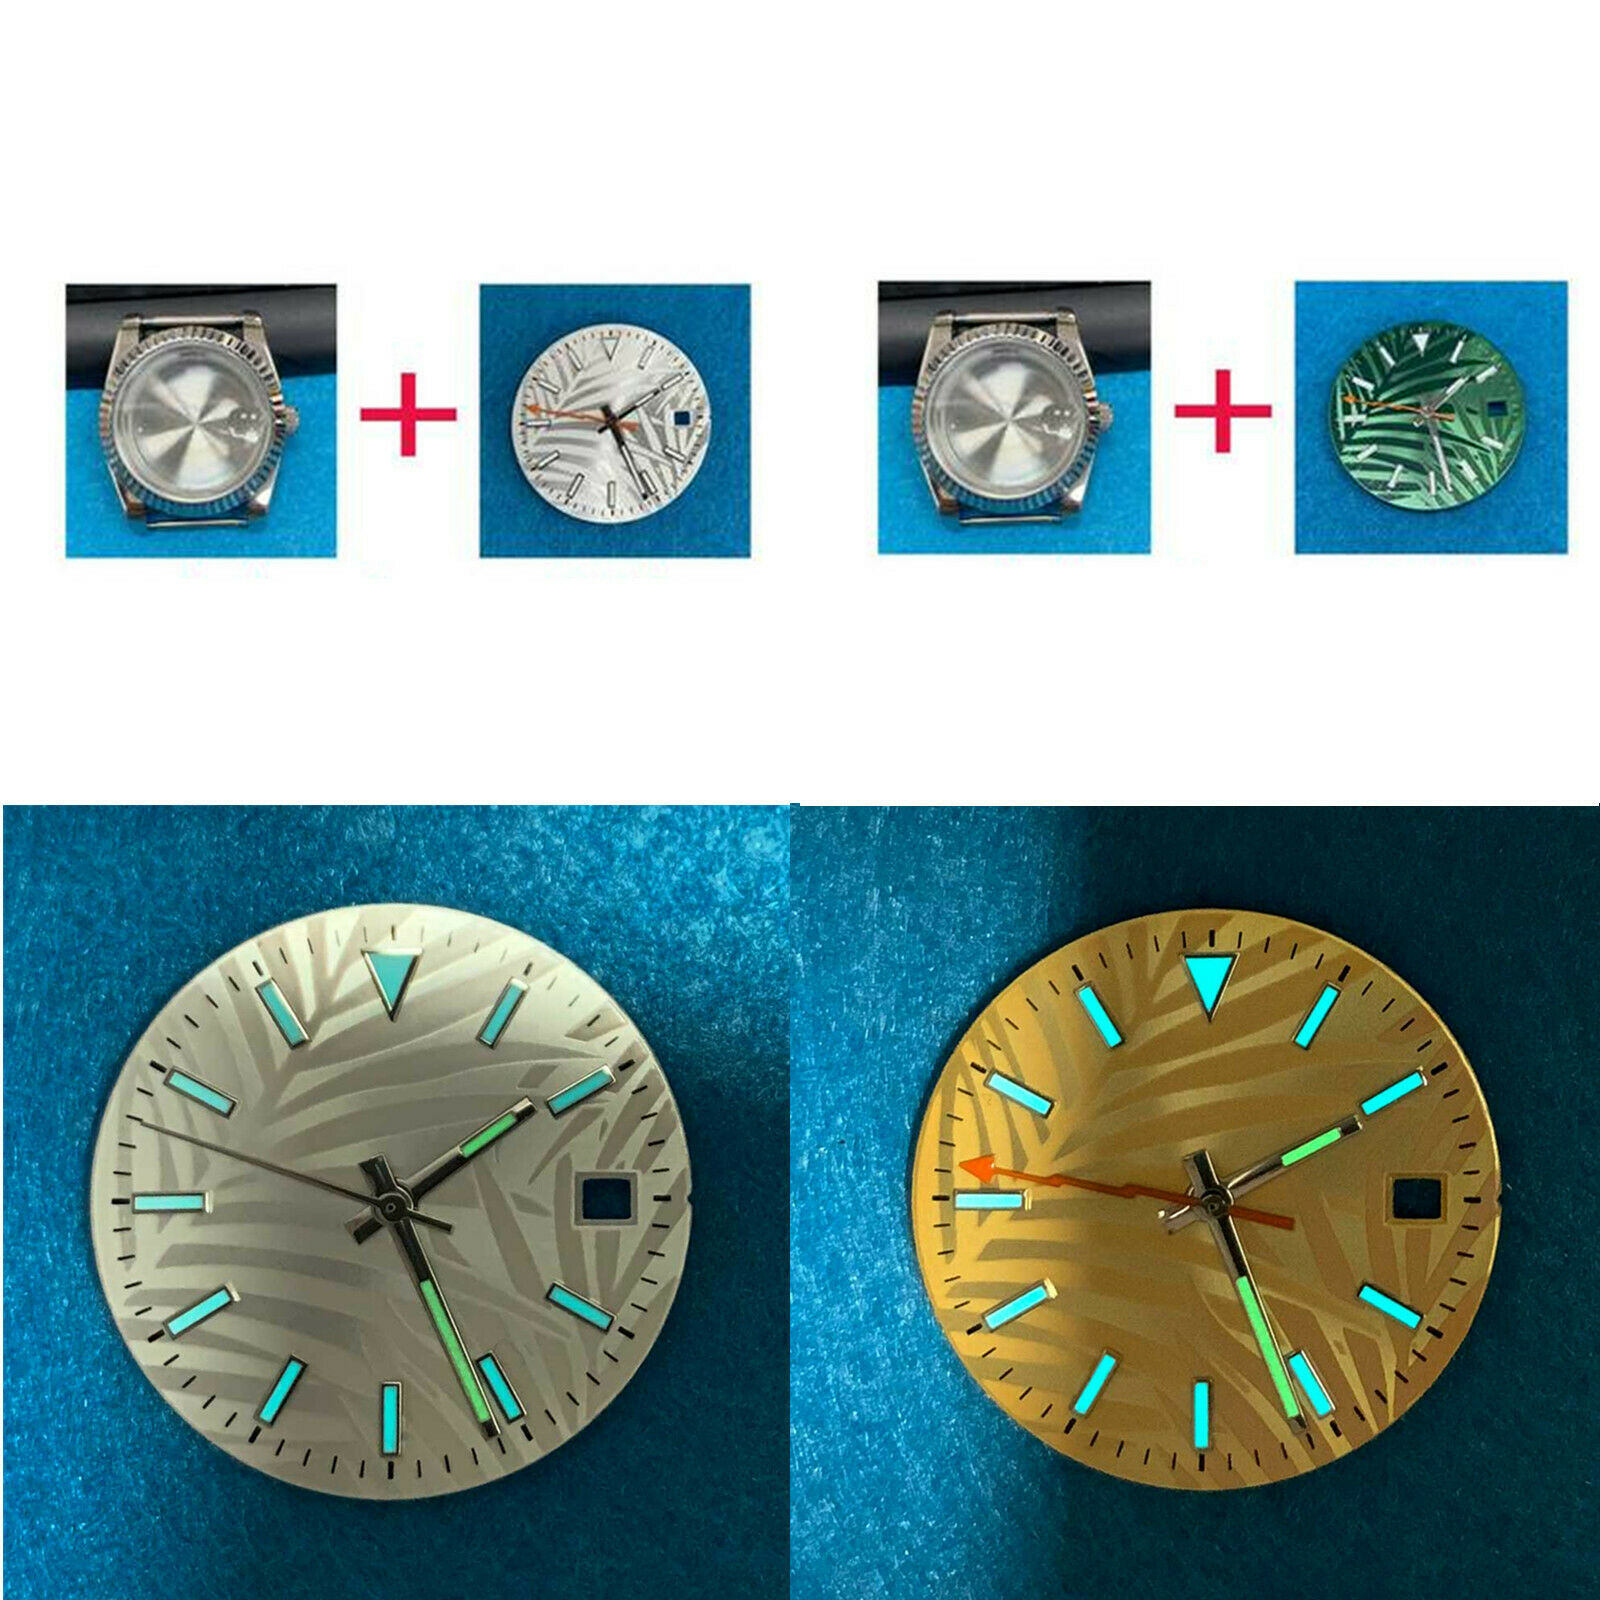 Stainless Steel Watch Case Dial Watch Hands For 2813/8205/8200 Watch Movements